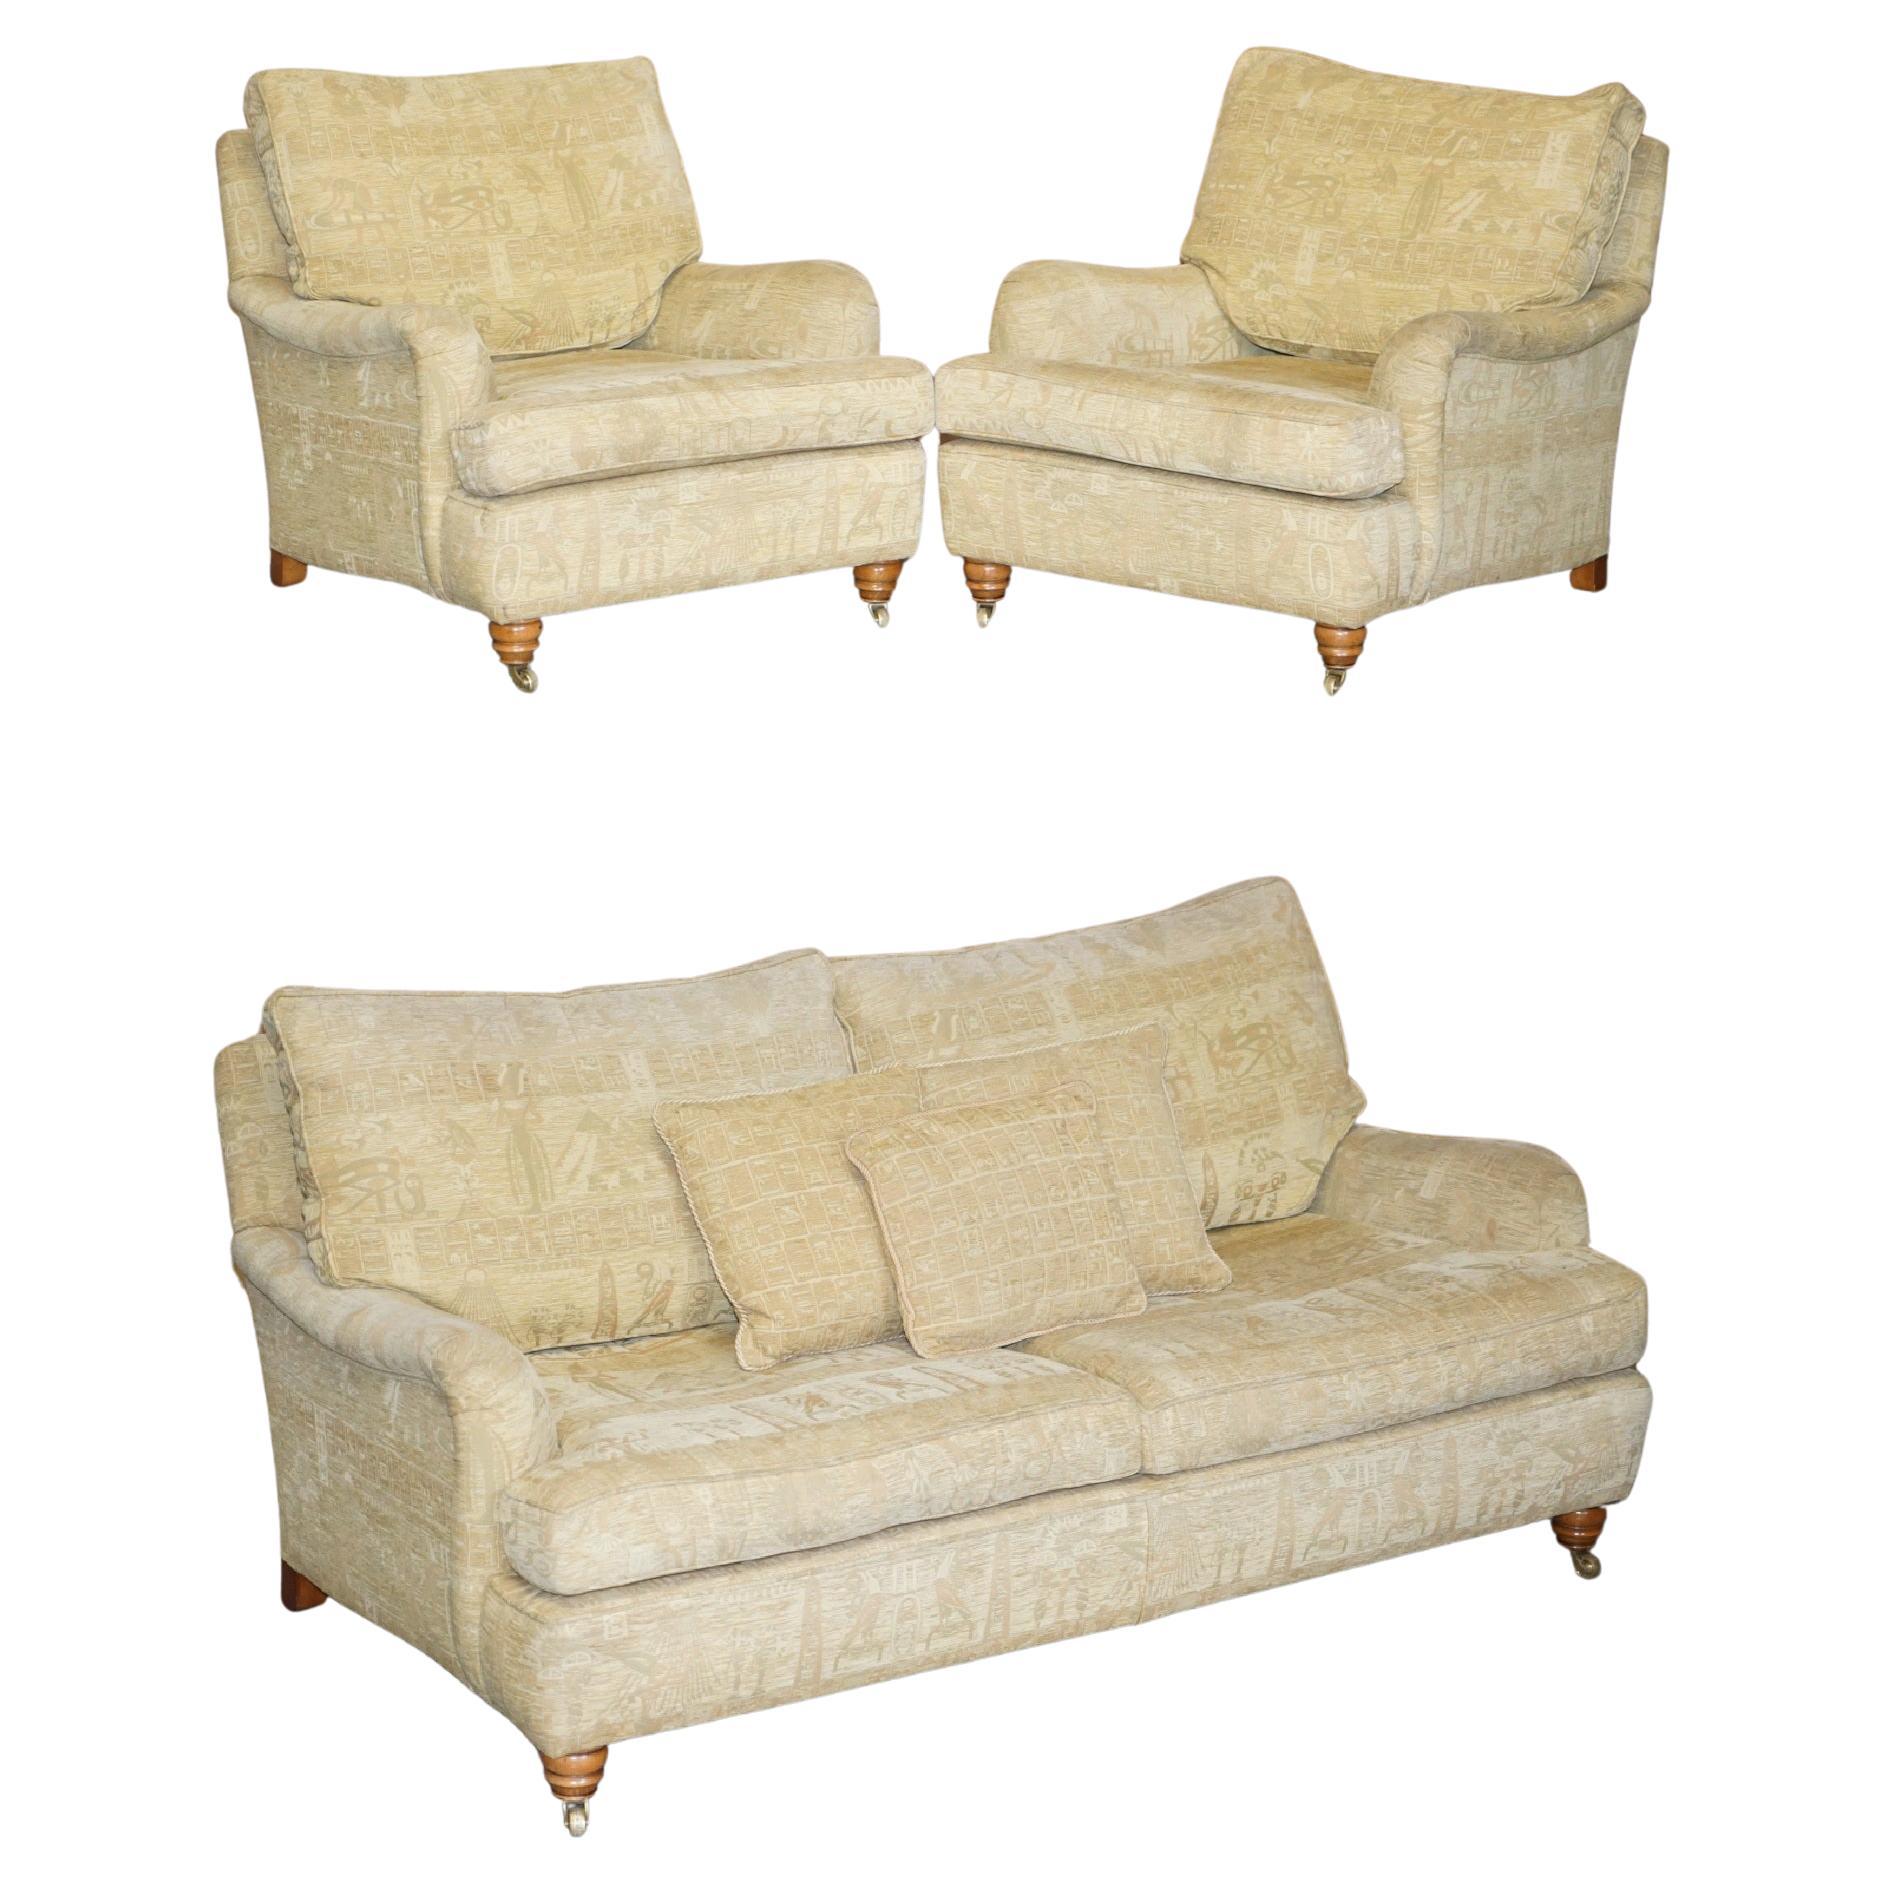 Lovely Duresta Lansdowne Sofa & Pair of Armchairs Suite Egyptian Upholstery